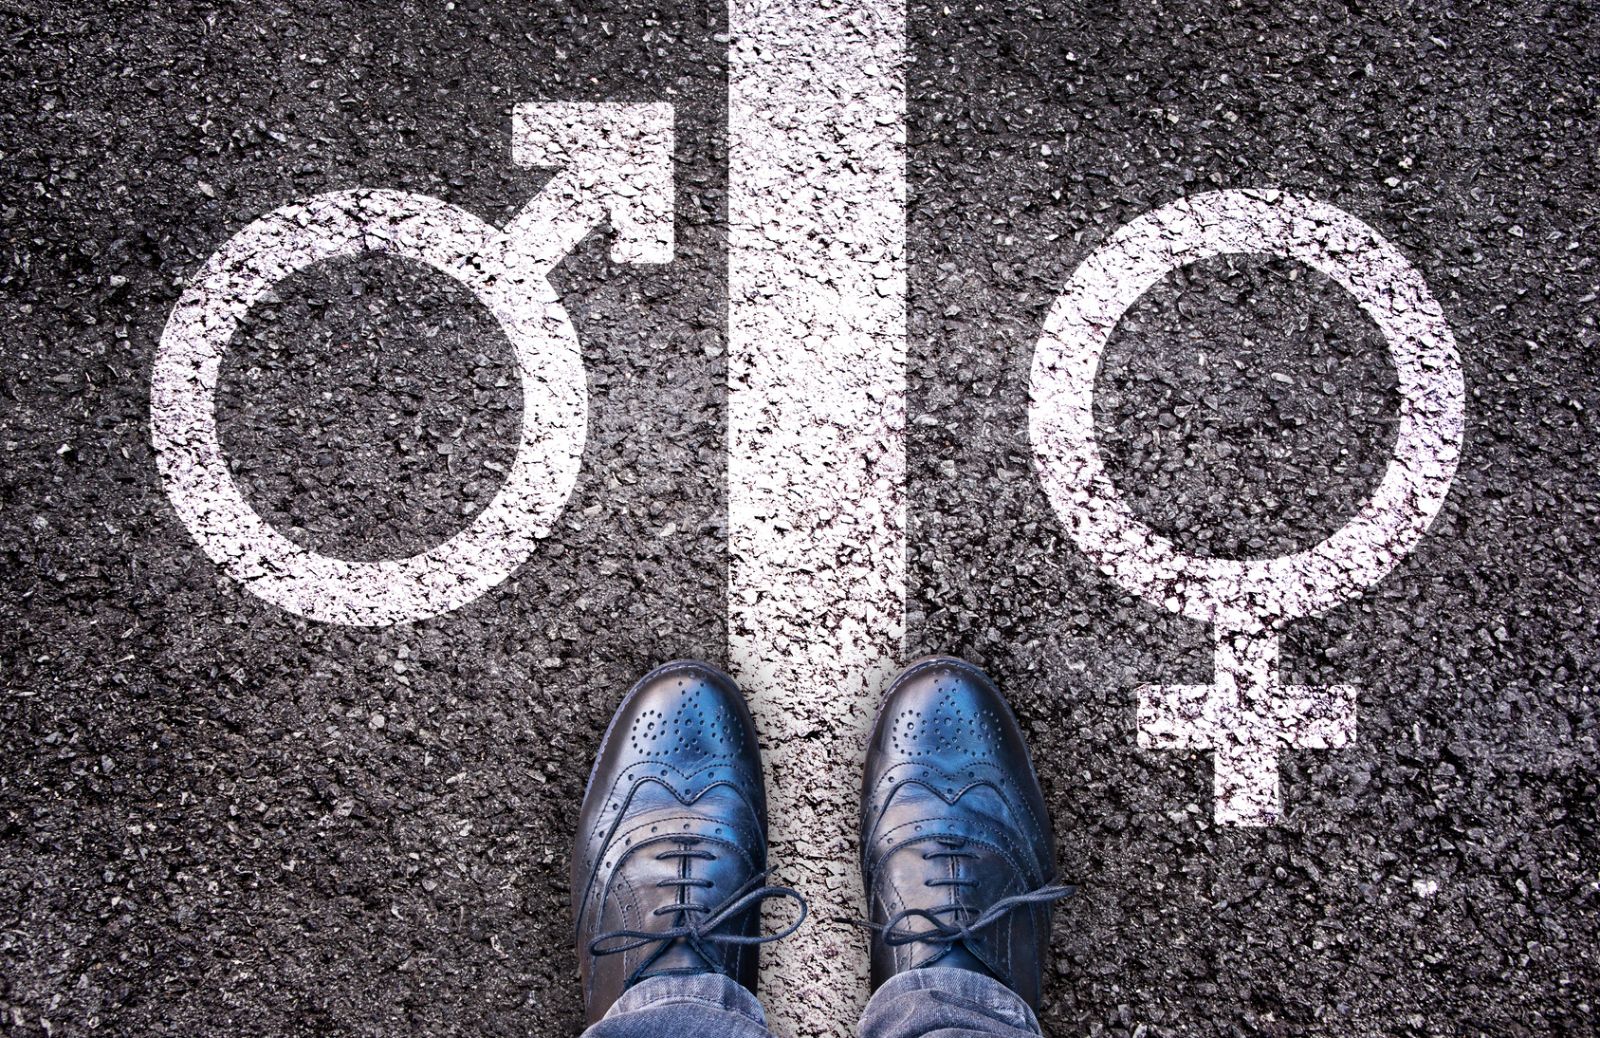 Gender is over (if you want it), una campagna contro le differenze di genere